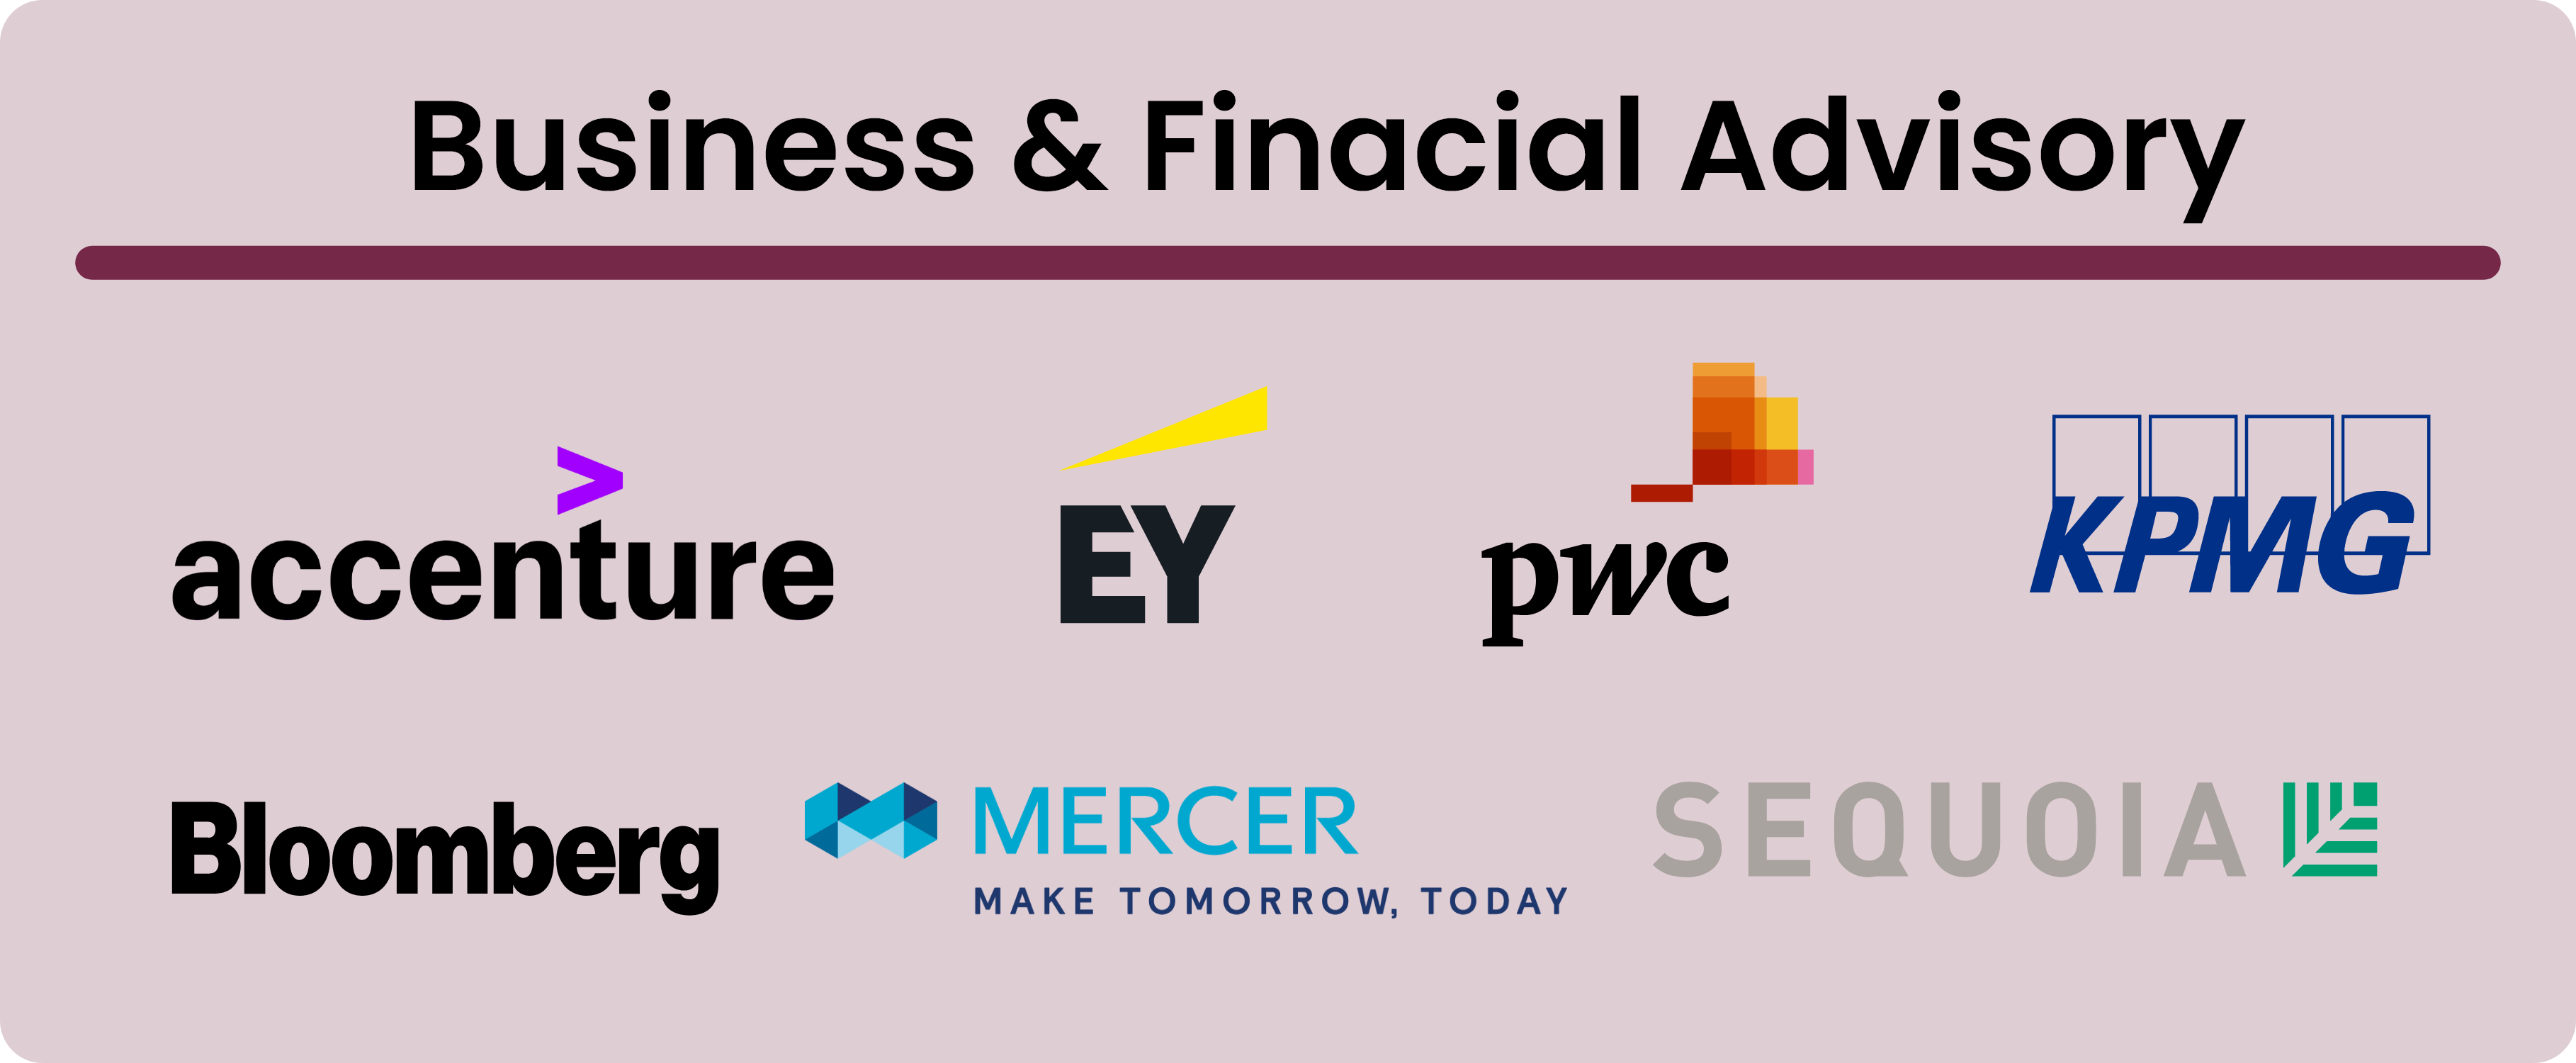 Business and Financial,Accenture,EY,pwc,KPMG,Bloomberg,MERCER,SEQUOIA